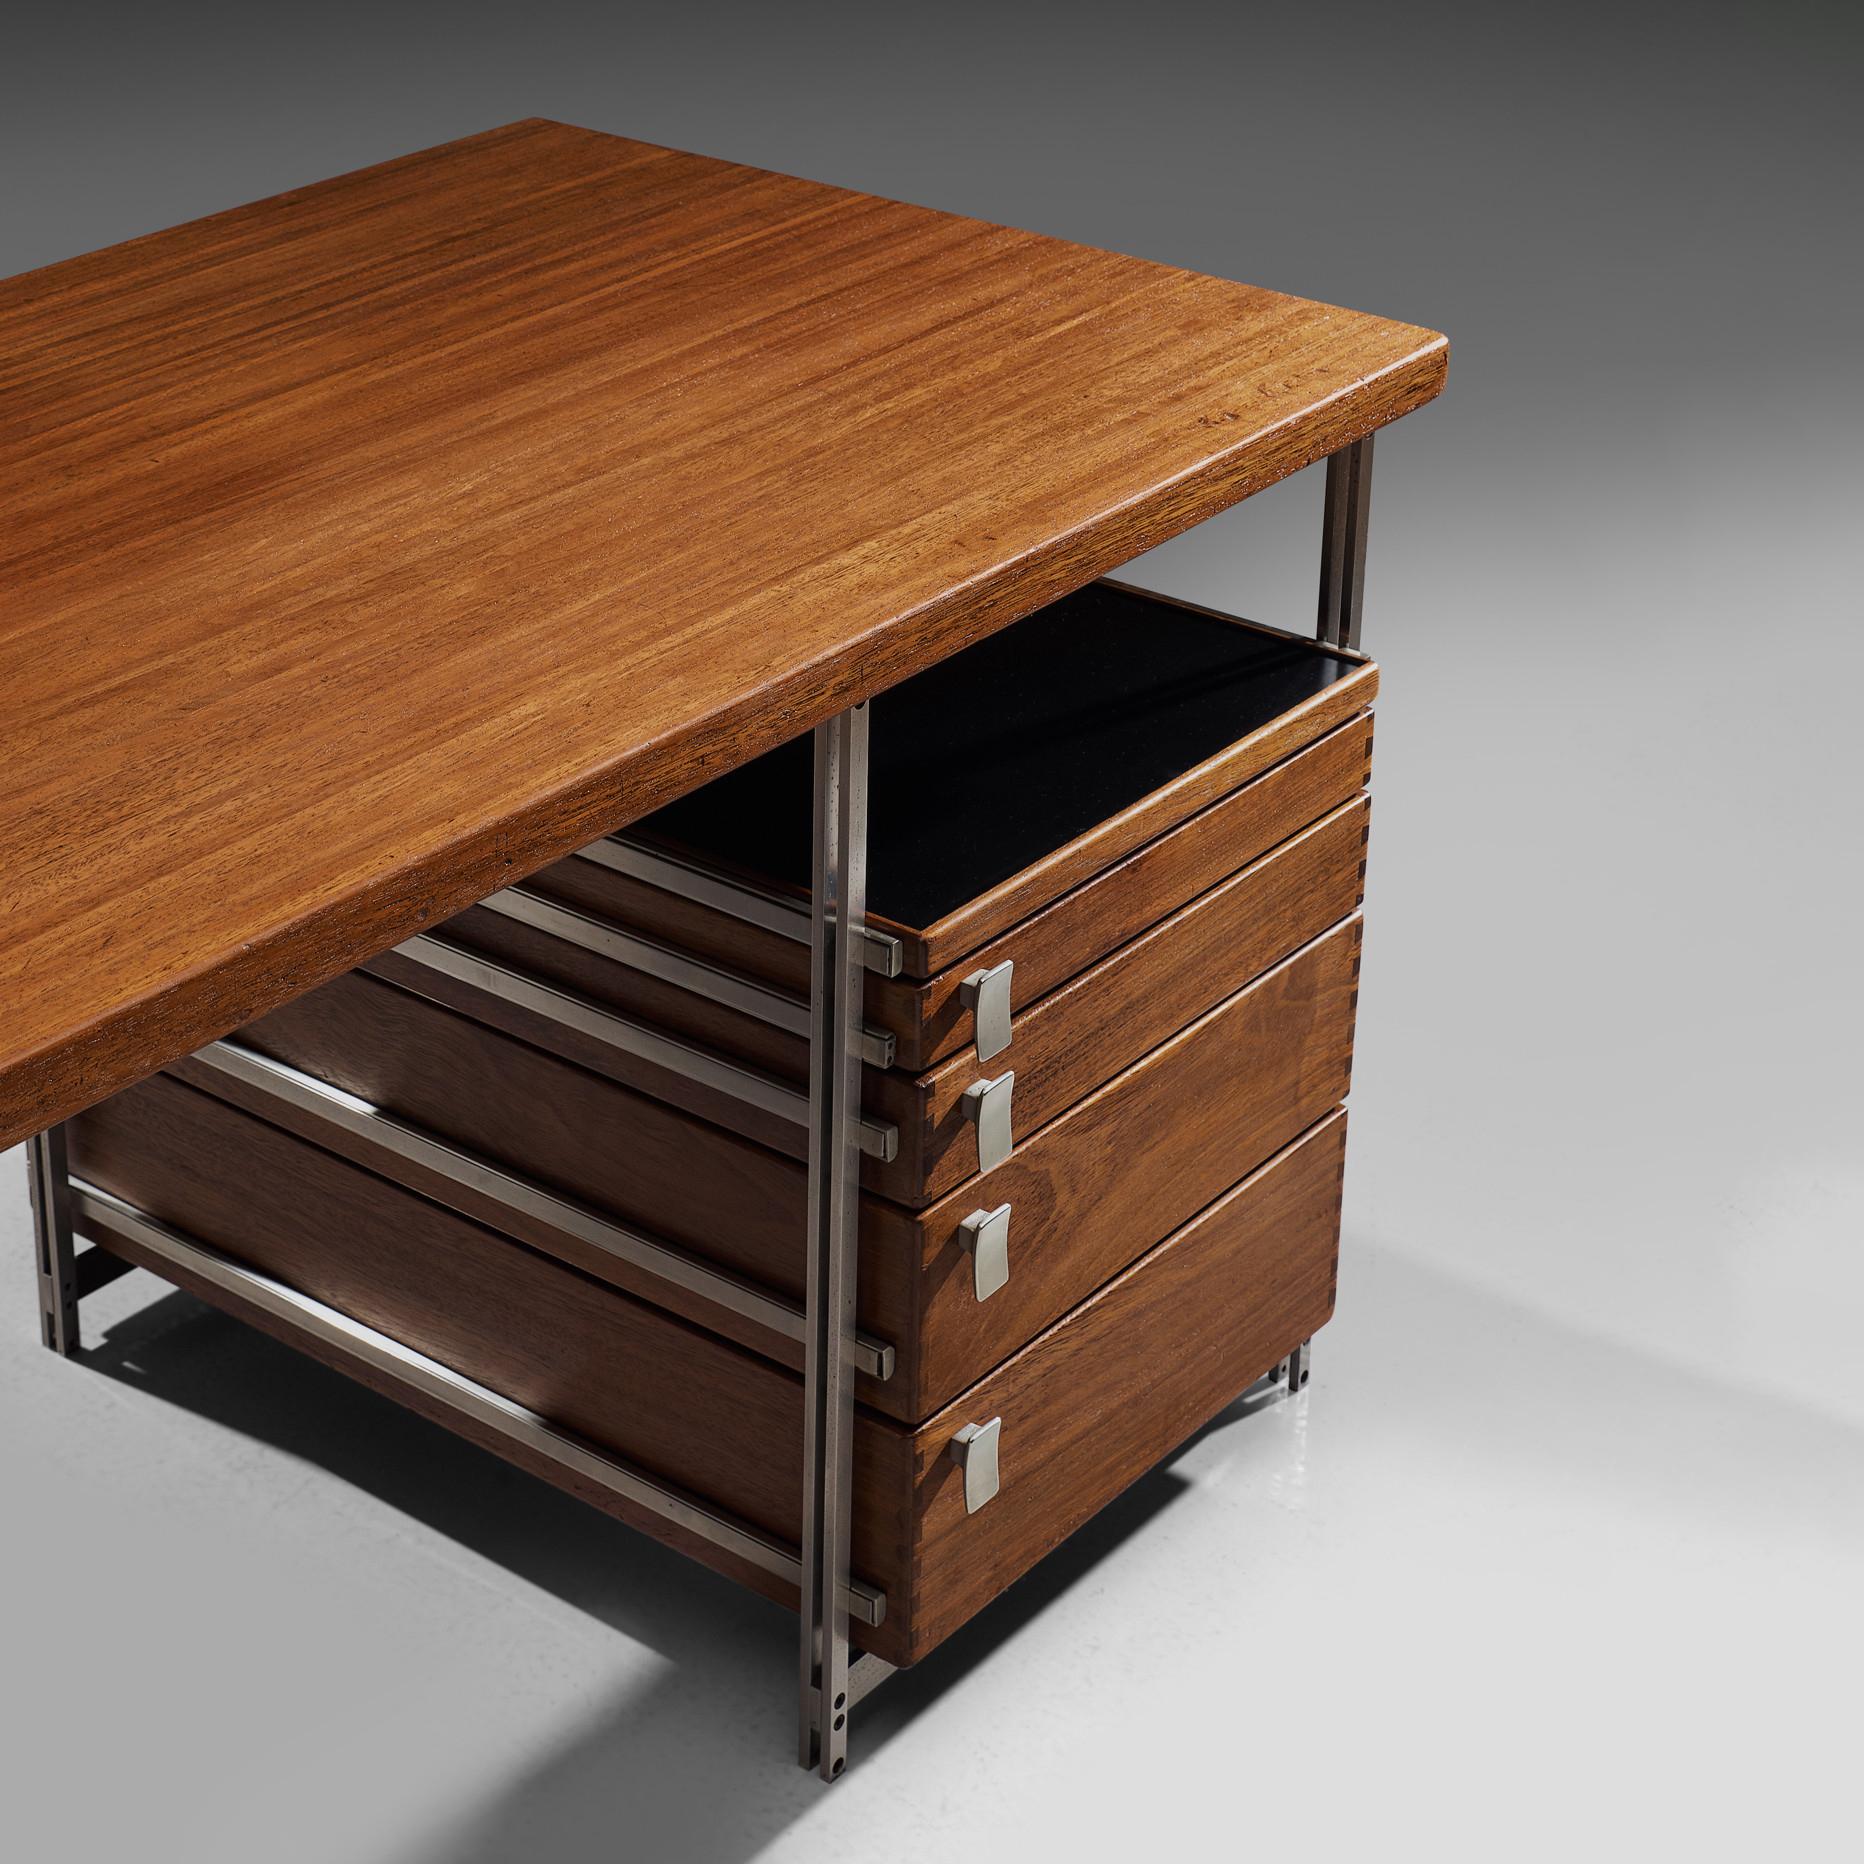 Metal Jules Wabbes Desk in Mutenyé Wood Made for the Foncolin Building Brussels 